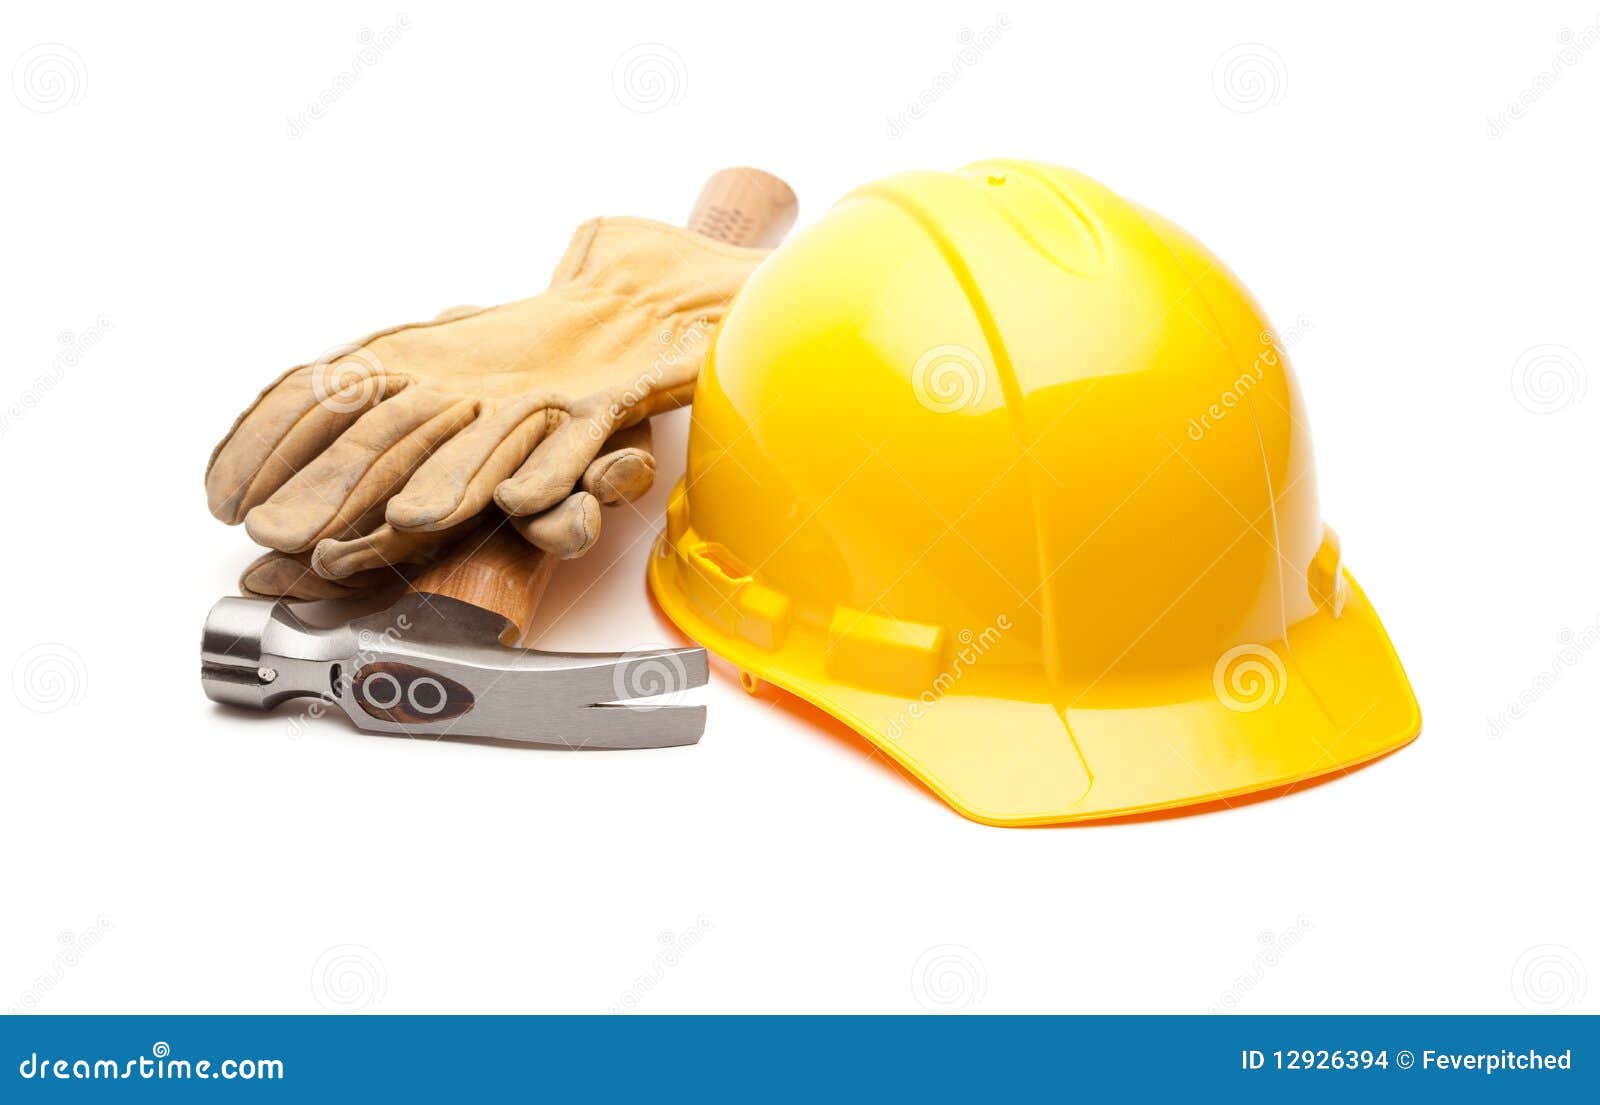 yellow hard hat, gloves and hammer on white